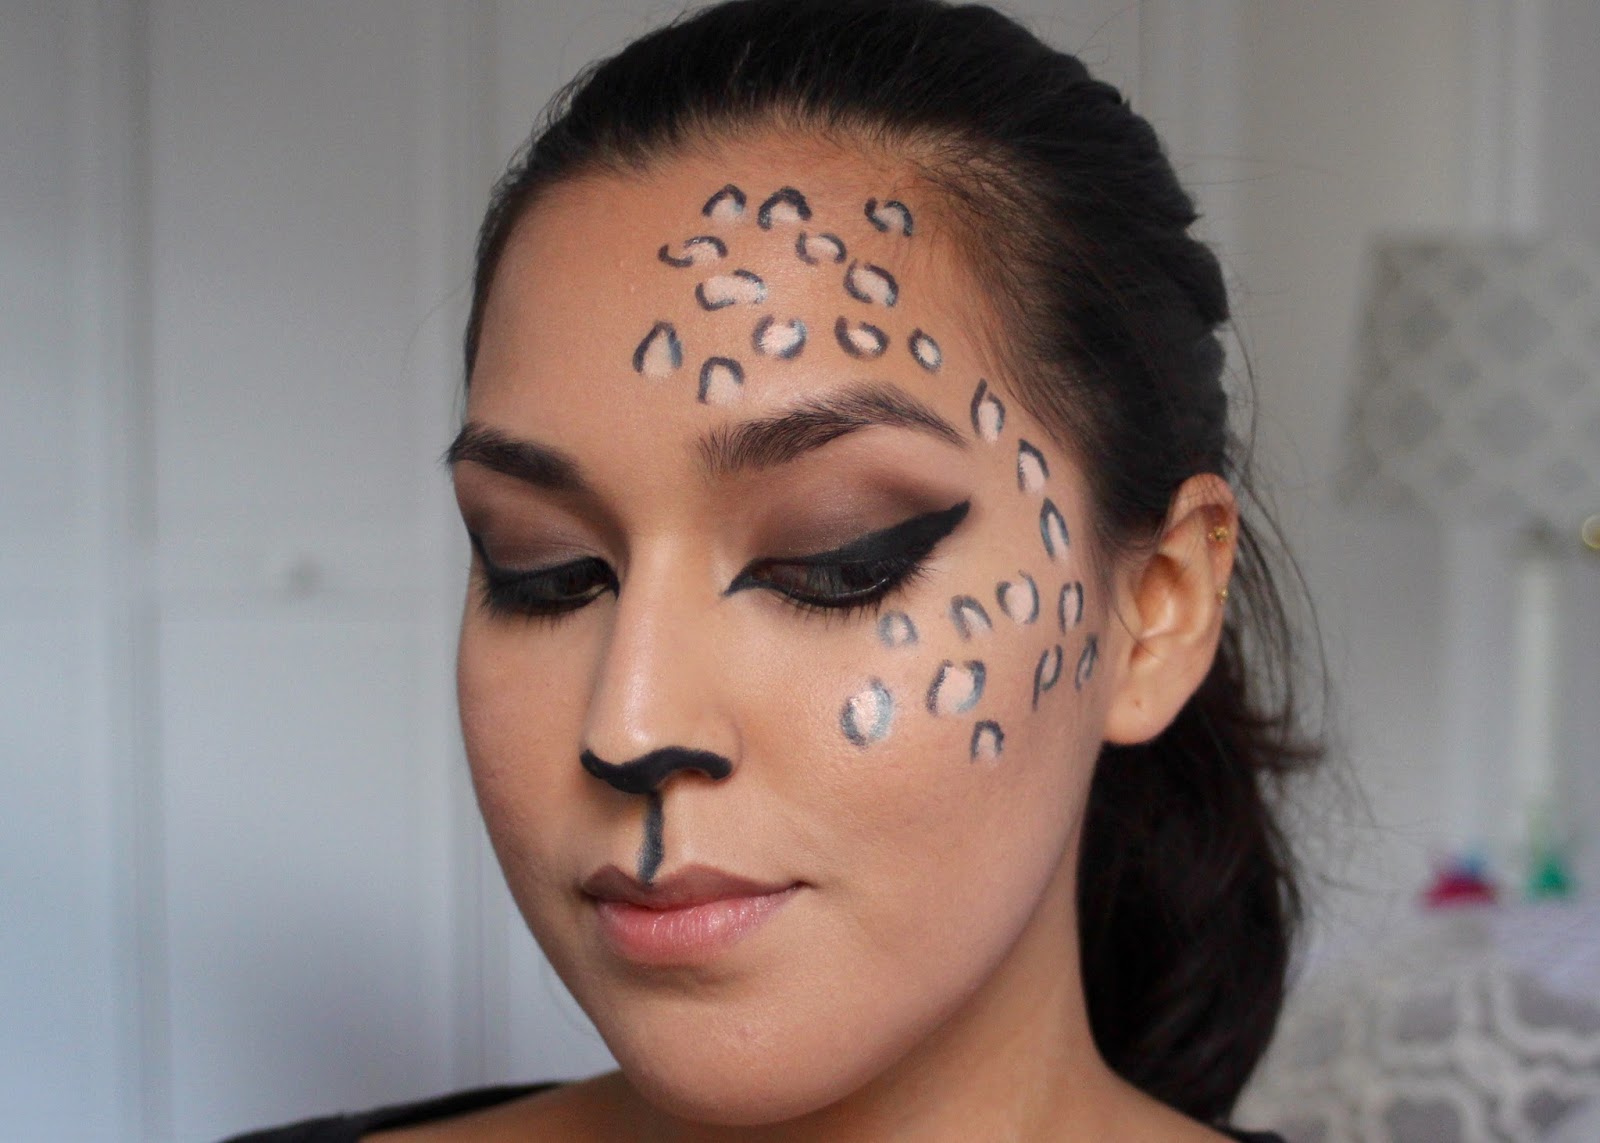 Pretty Leopard Makeup Tutorial for Halloween - Domesticated Me